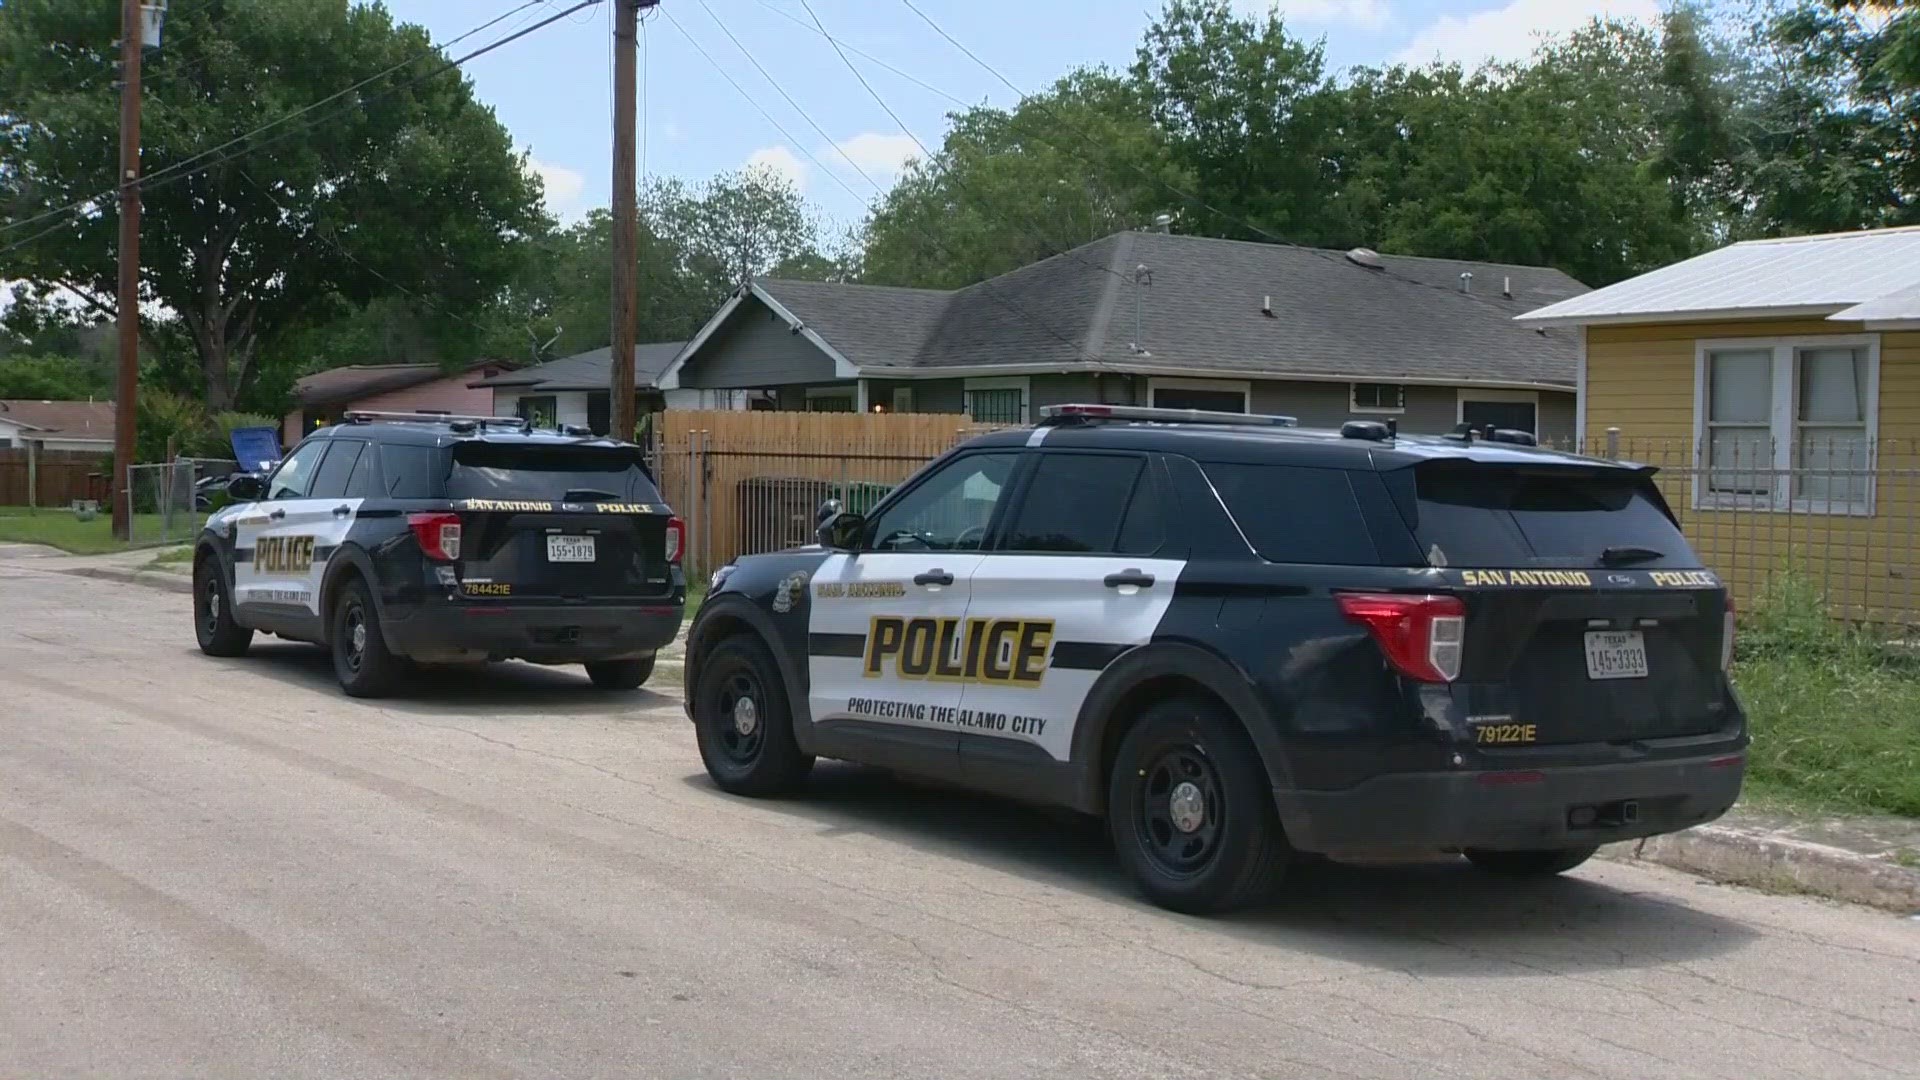 Police received a call for an intruder with a knife inside a home on the 500 block of Corliss located on the east side of town around 1 p.m. Tuesday.